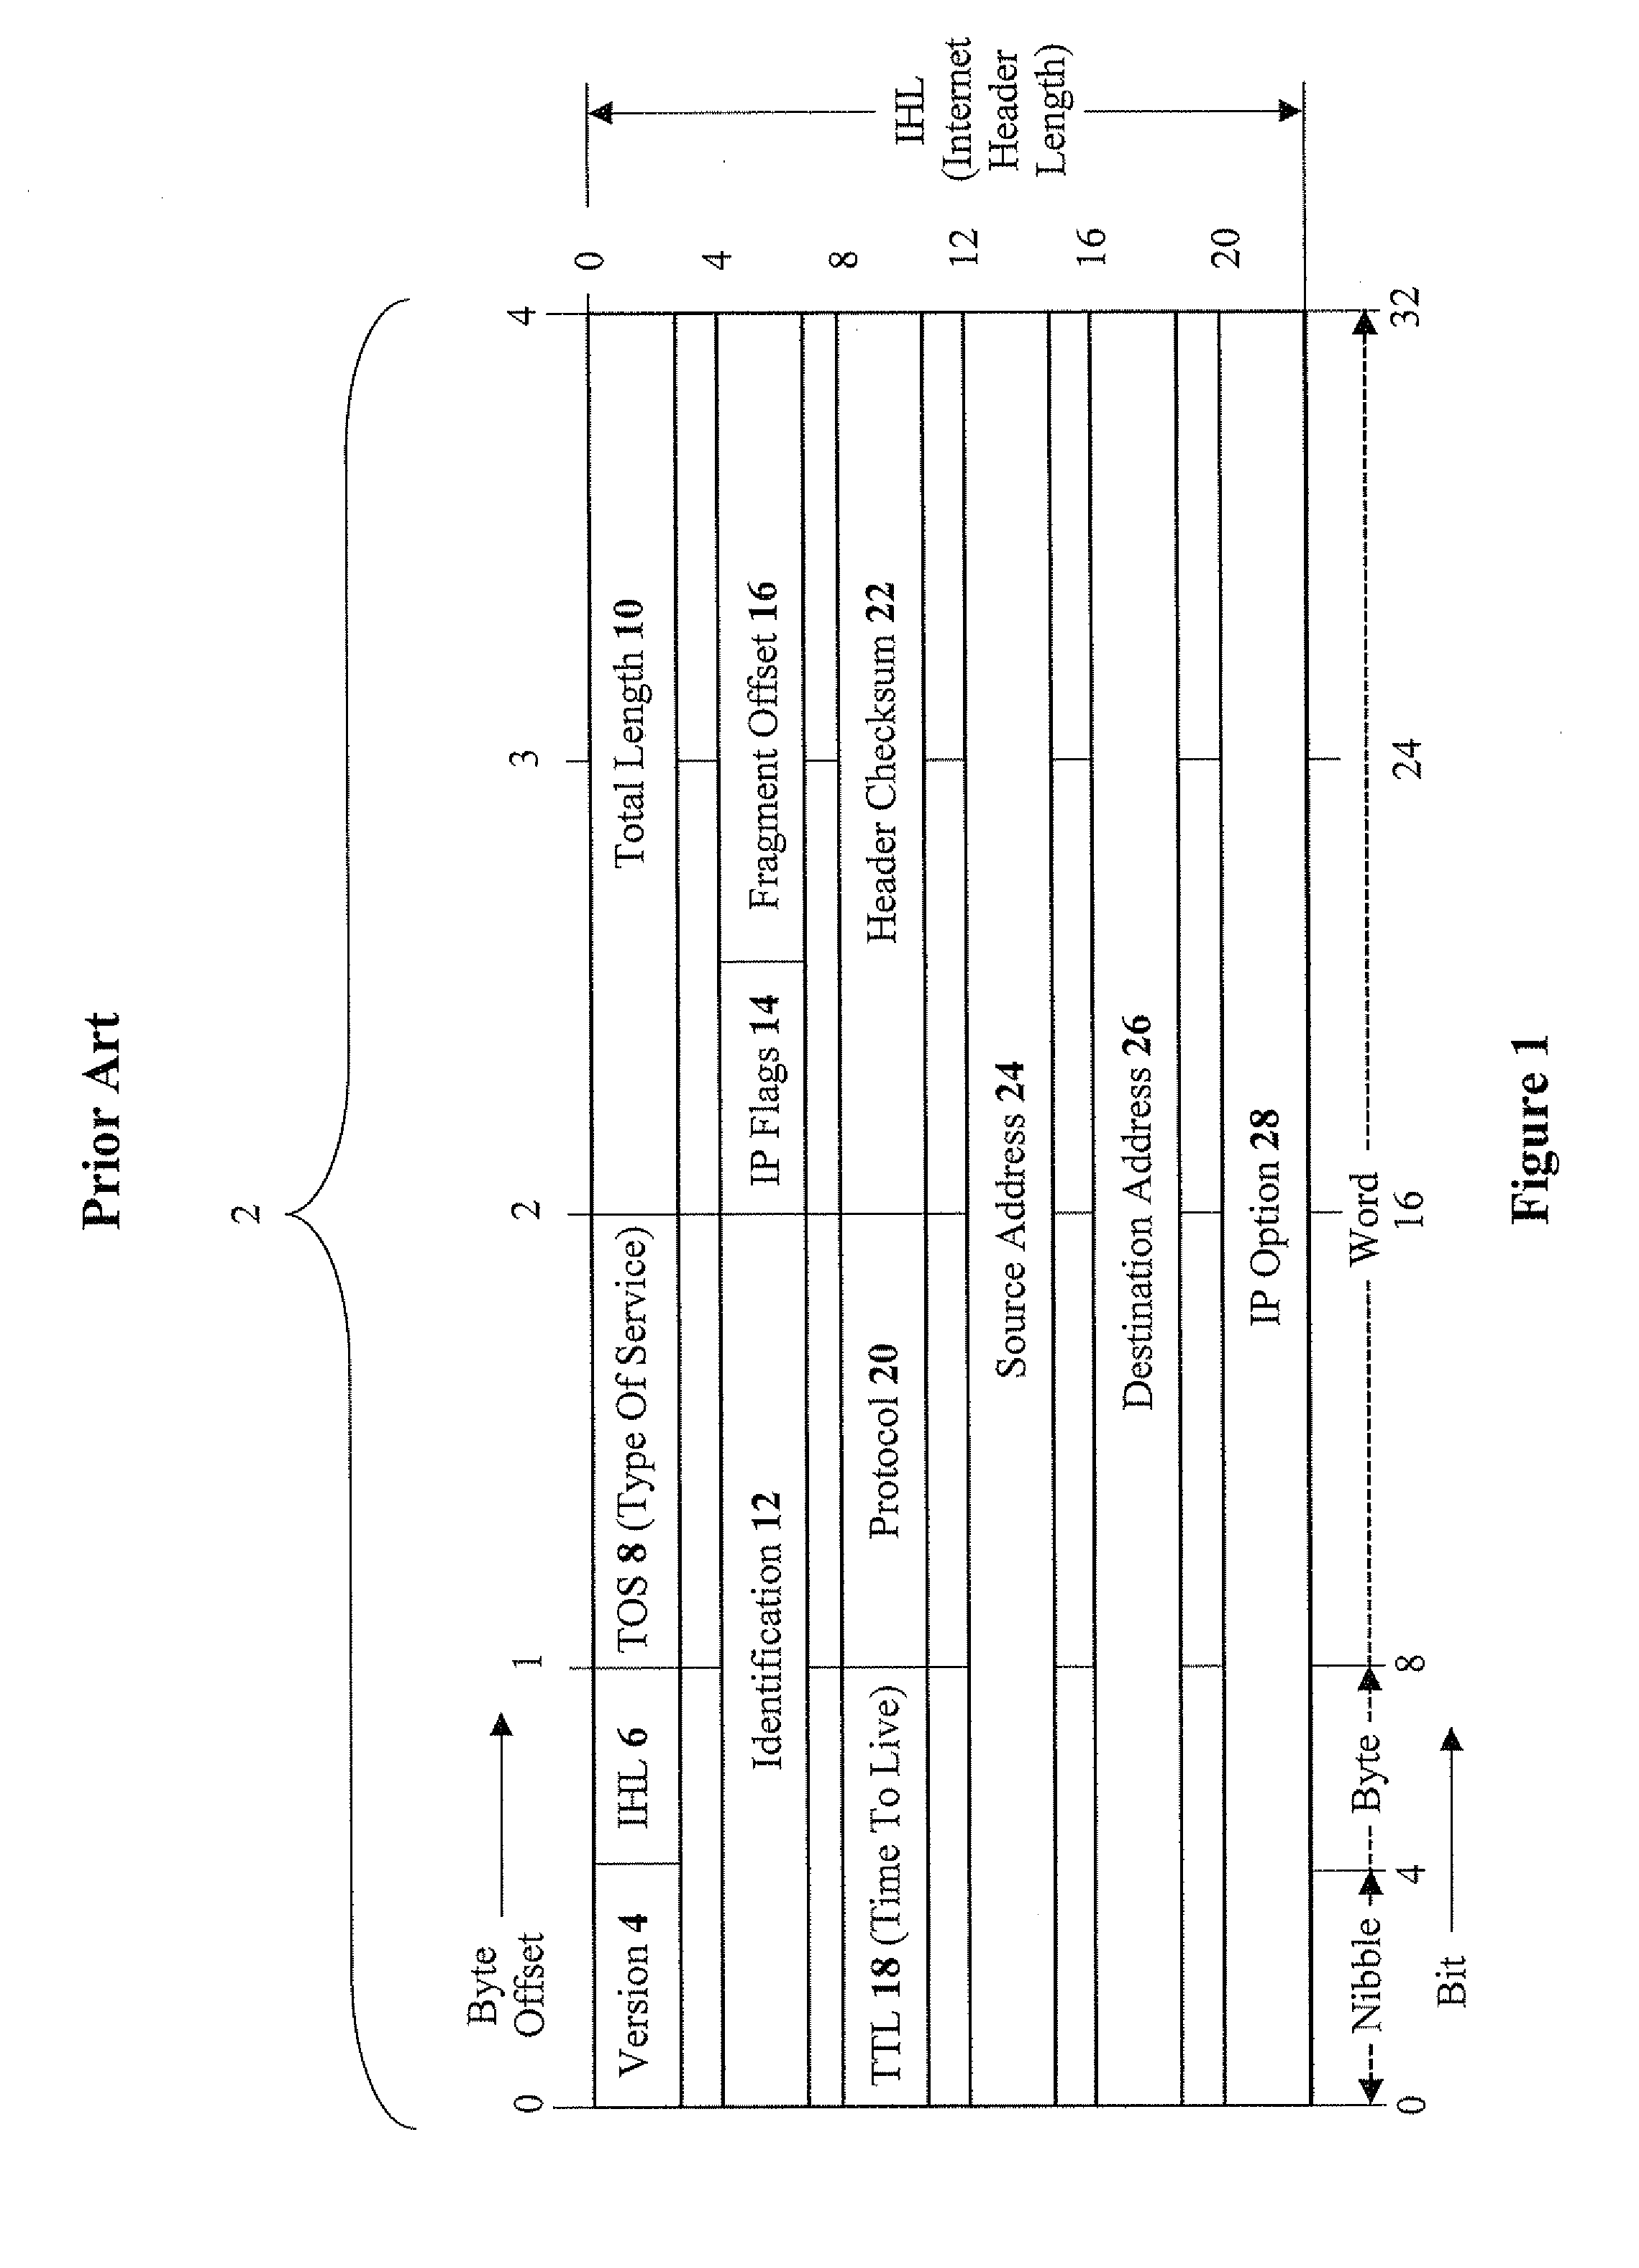 Methods and devices for enforcing network access control utilizing secure packet tagging